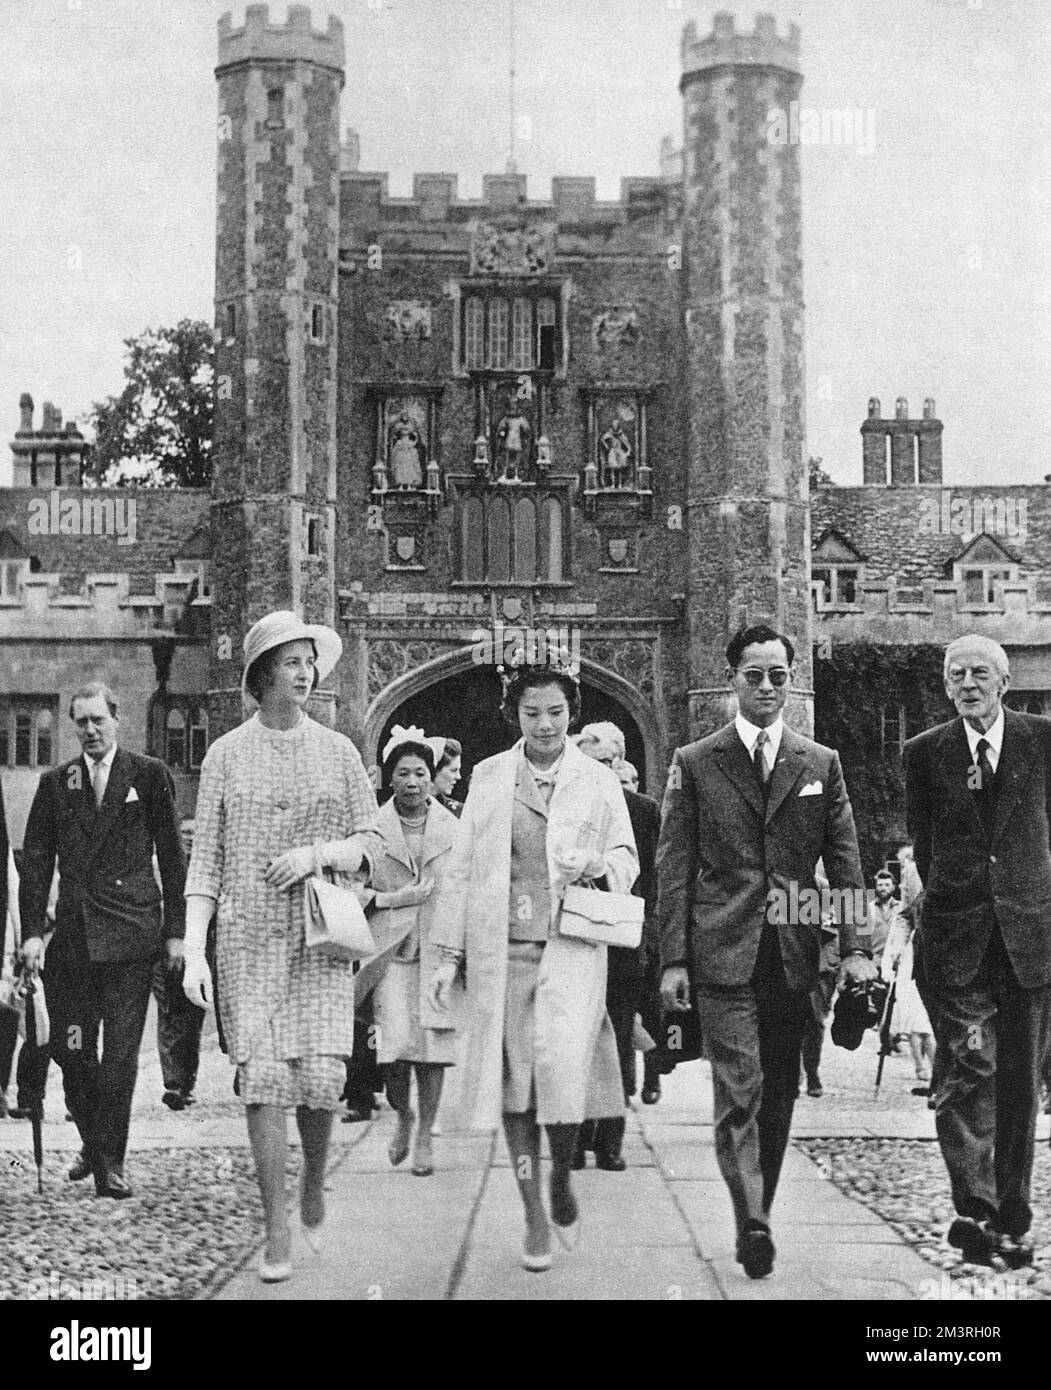 An official two-day state visit to the UK by King Bhumibol Adulyadej (Rama IX) (1927-) and Queen Sirikit (1932-) of Thailand - visiting Cambridge (walking through the Great Court of Trinity College) accompanied by Princess Alexandra of Kent (1936-) and Lord Adrian (Edgar Douglas Adrian, 1st Baron Adrian OM PRS - an English electrophysiologist and recipient of the 1932 Nobel Prize for Physiology, won jointly with Sir Charles Sherrington for work on the function of neurons) (1889-1977).     Date: 1960 Stock Photo